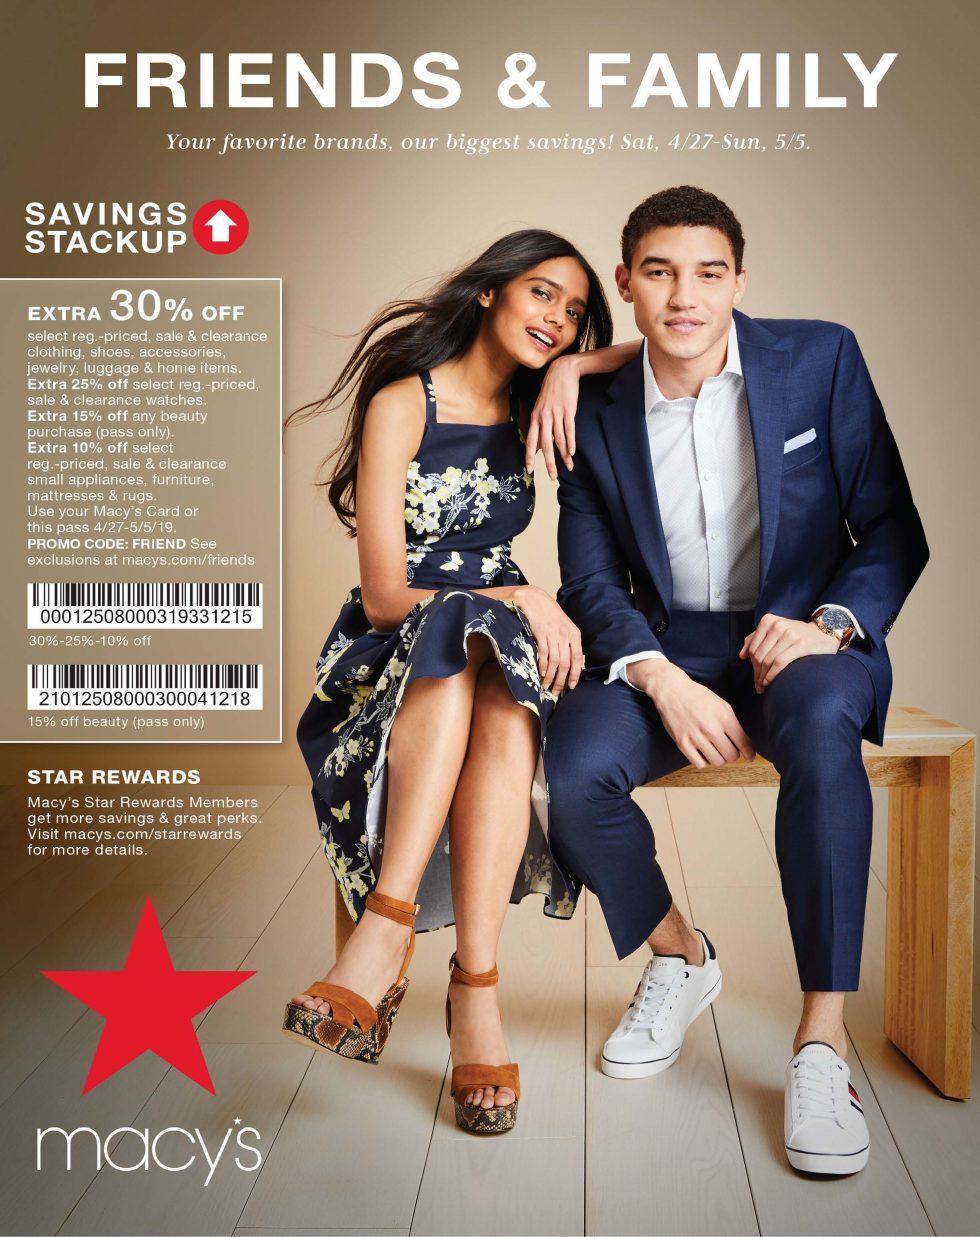 Macy's Friends and Family Sale Poughkeepsie Galleria